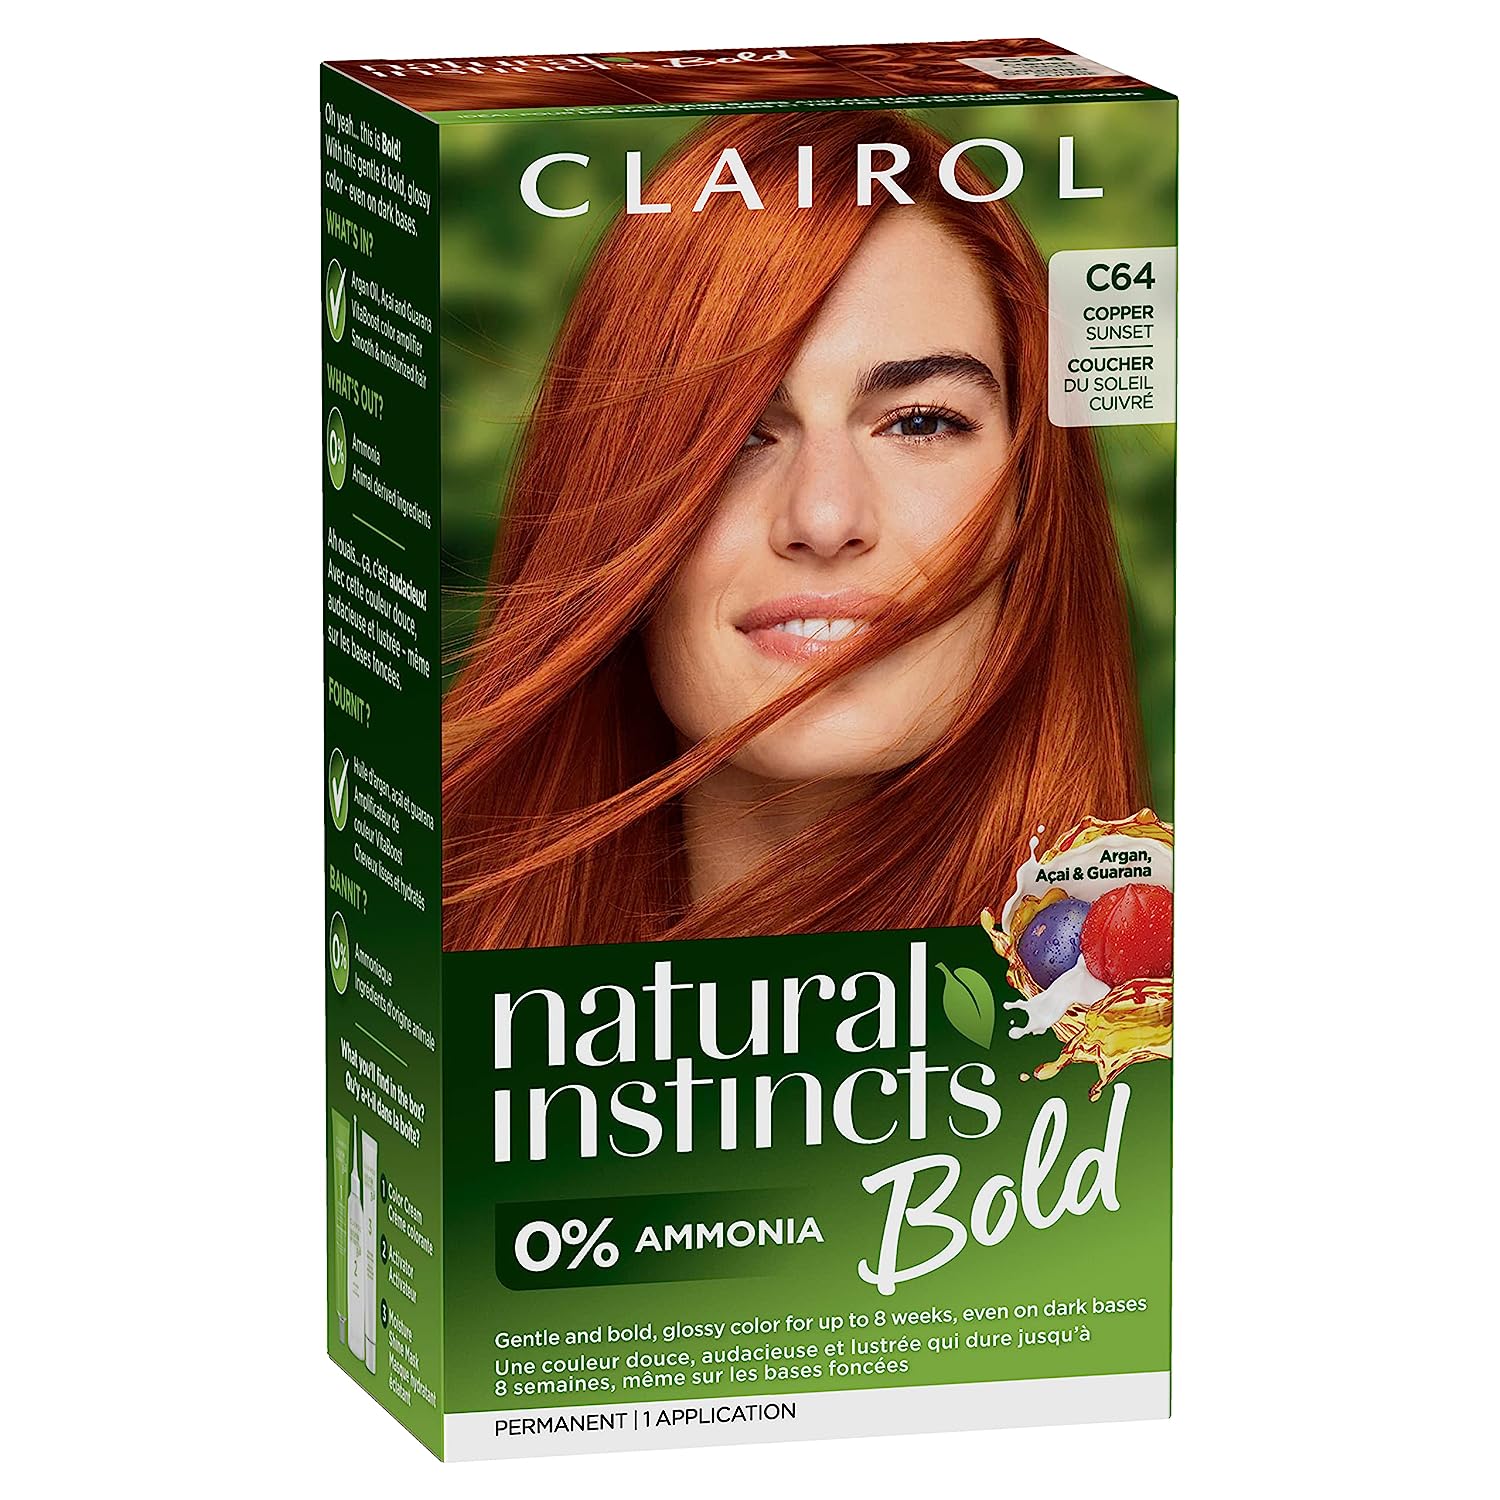 Clairol Natural Instincts Bold Permanent Hair Dye, C64 [...]